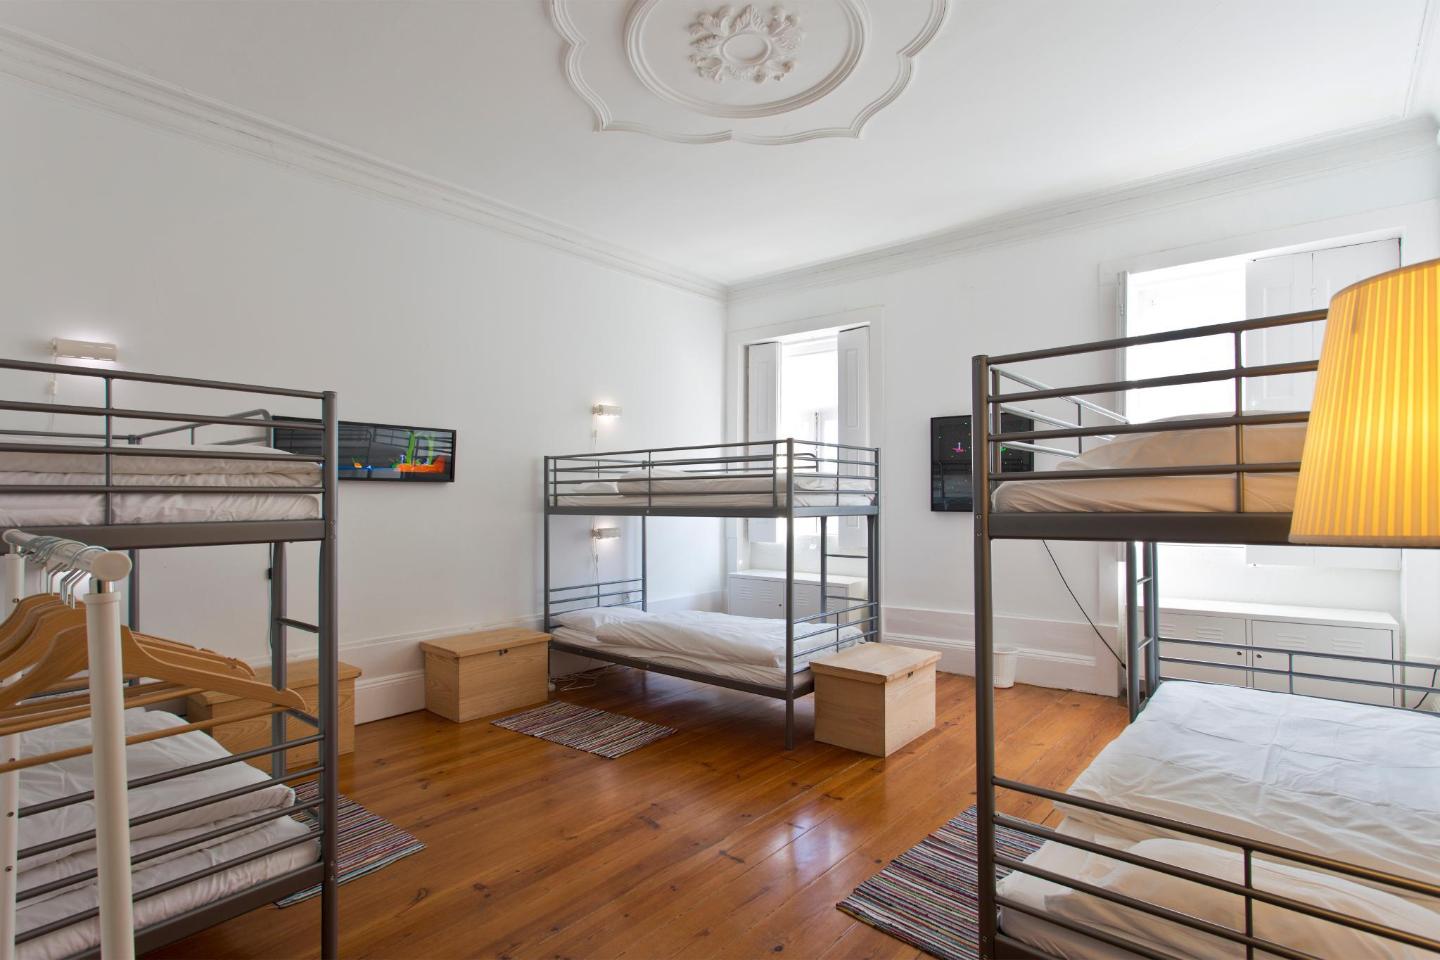 The 10 best hostels in Porto, Portugal | Booking.com